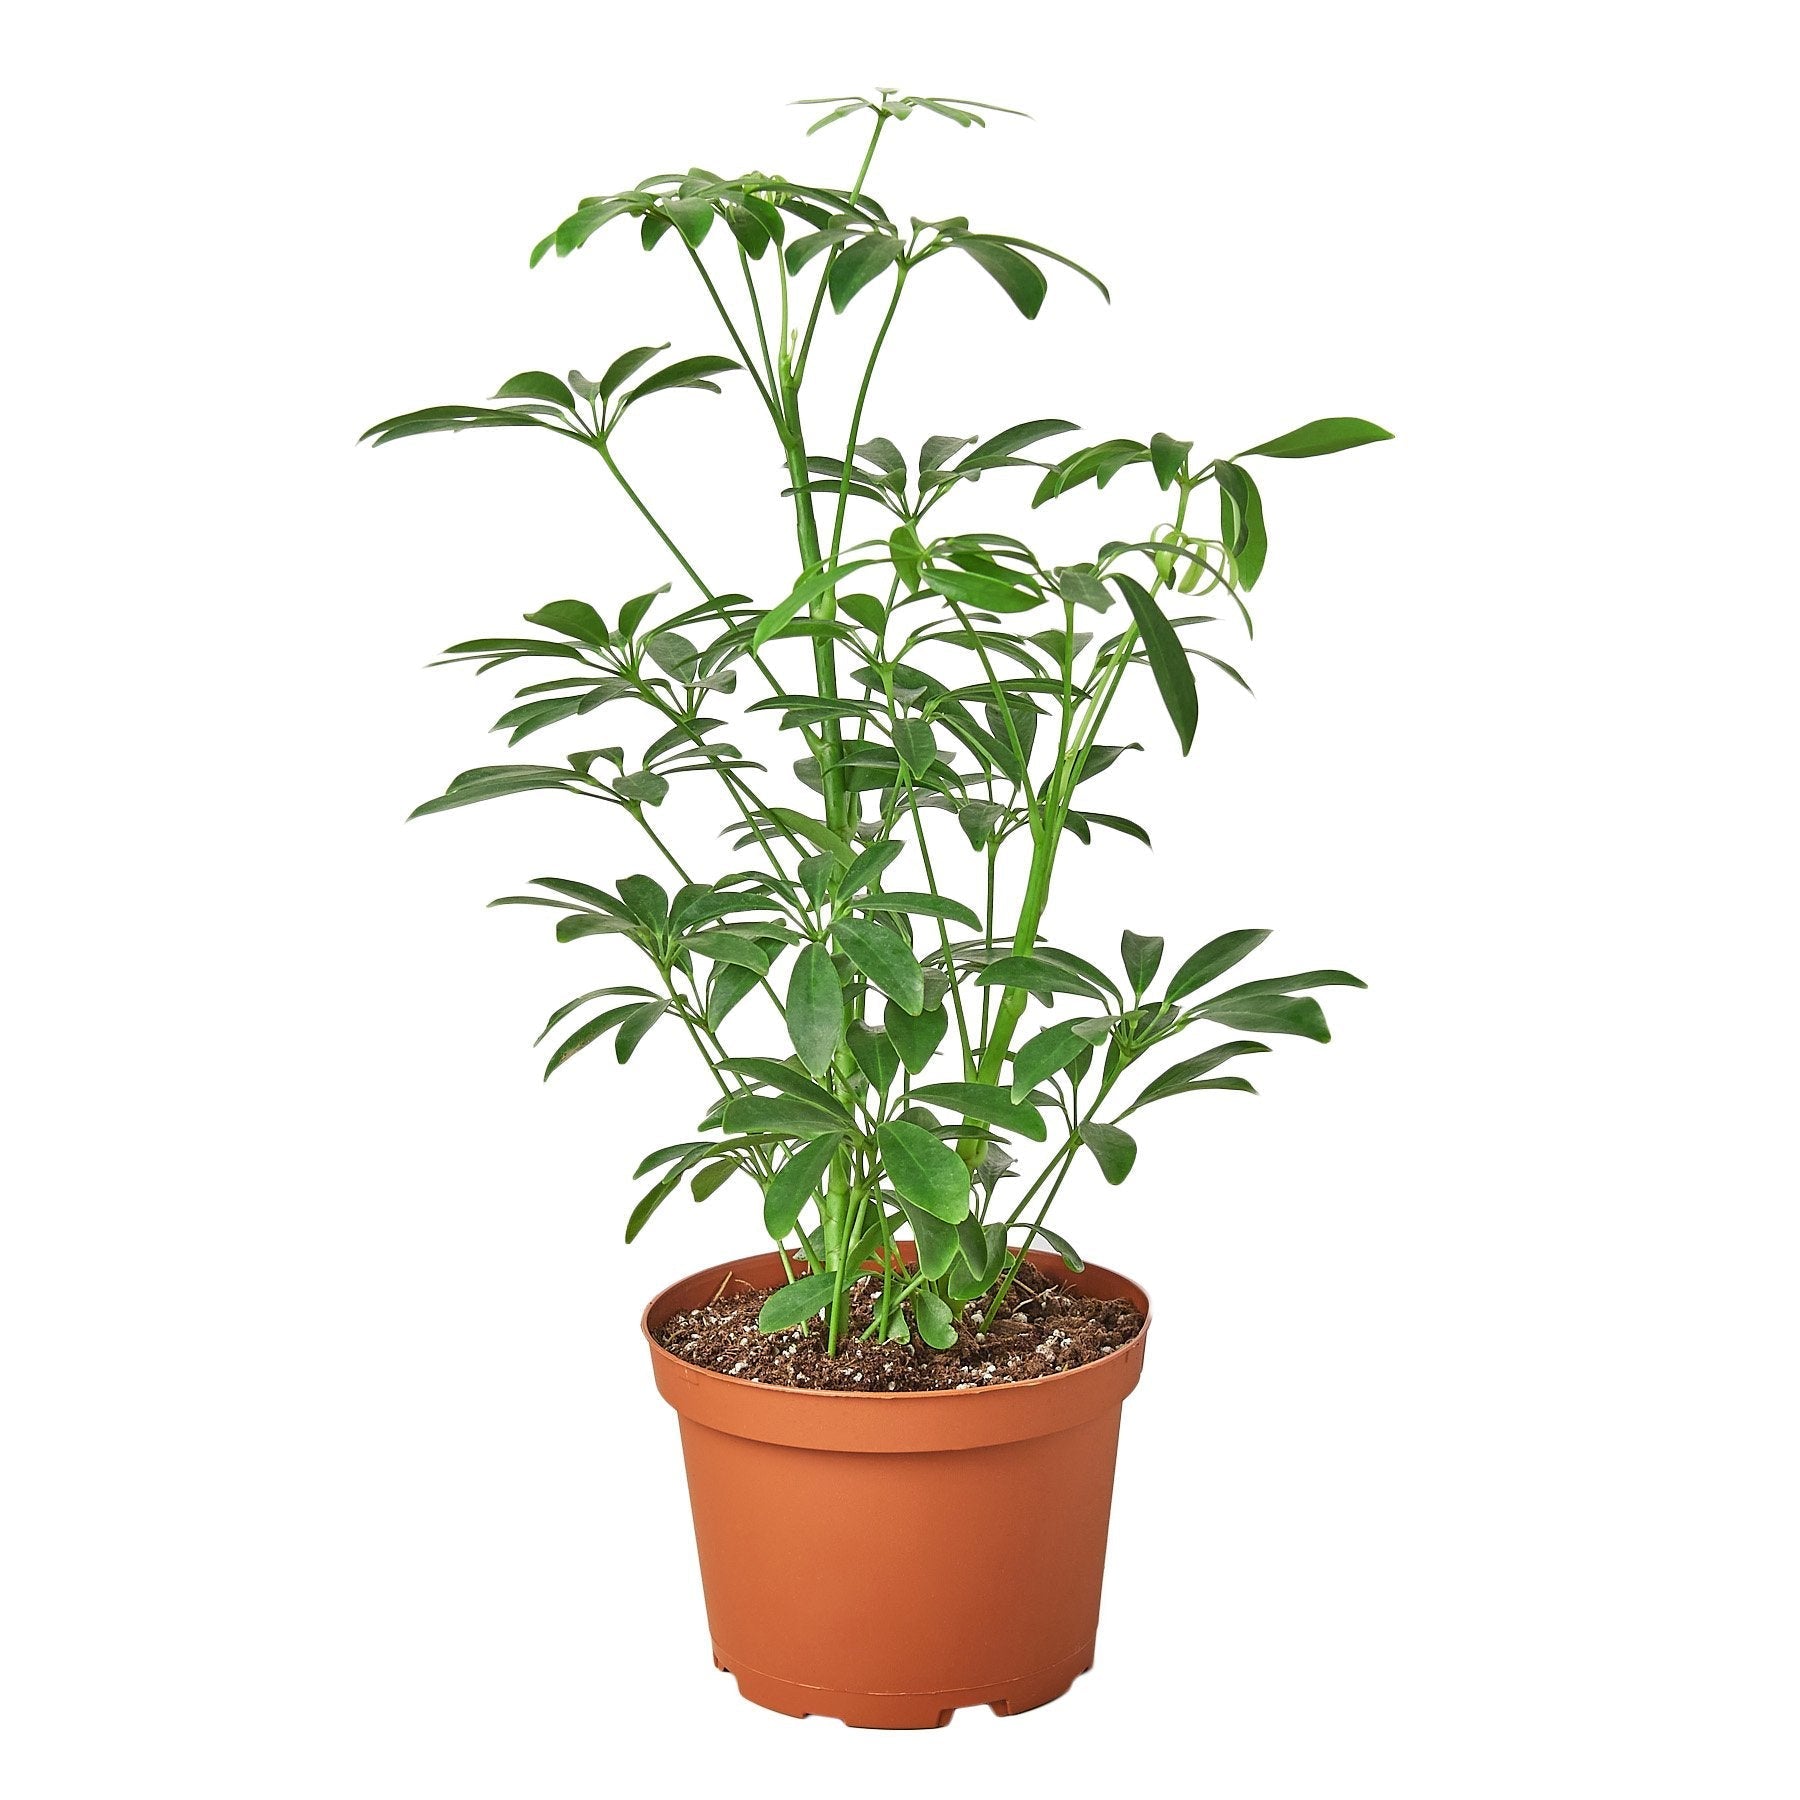 A plant in a pot on a white background at a garden center.